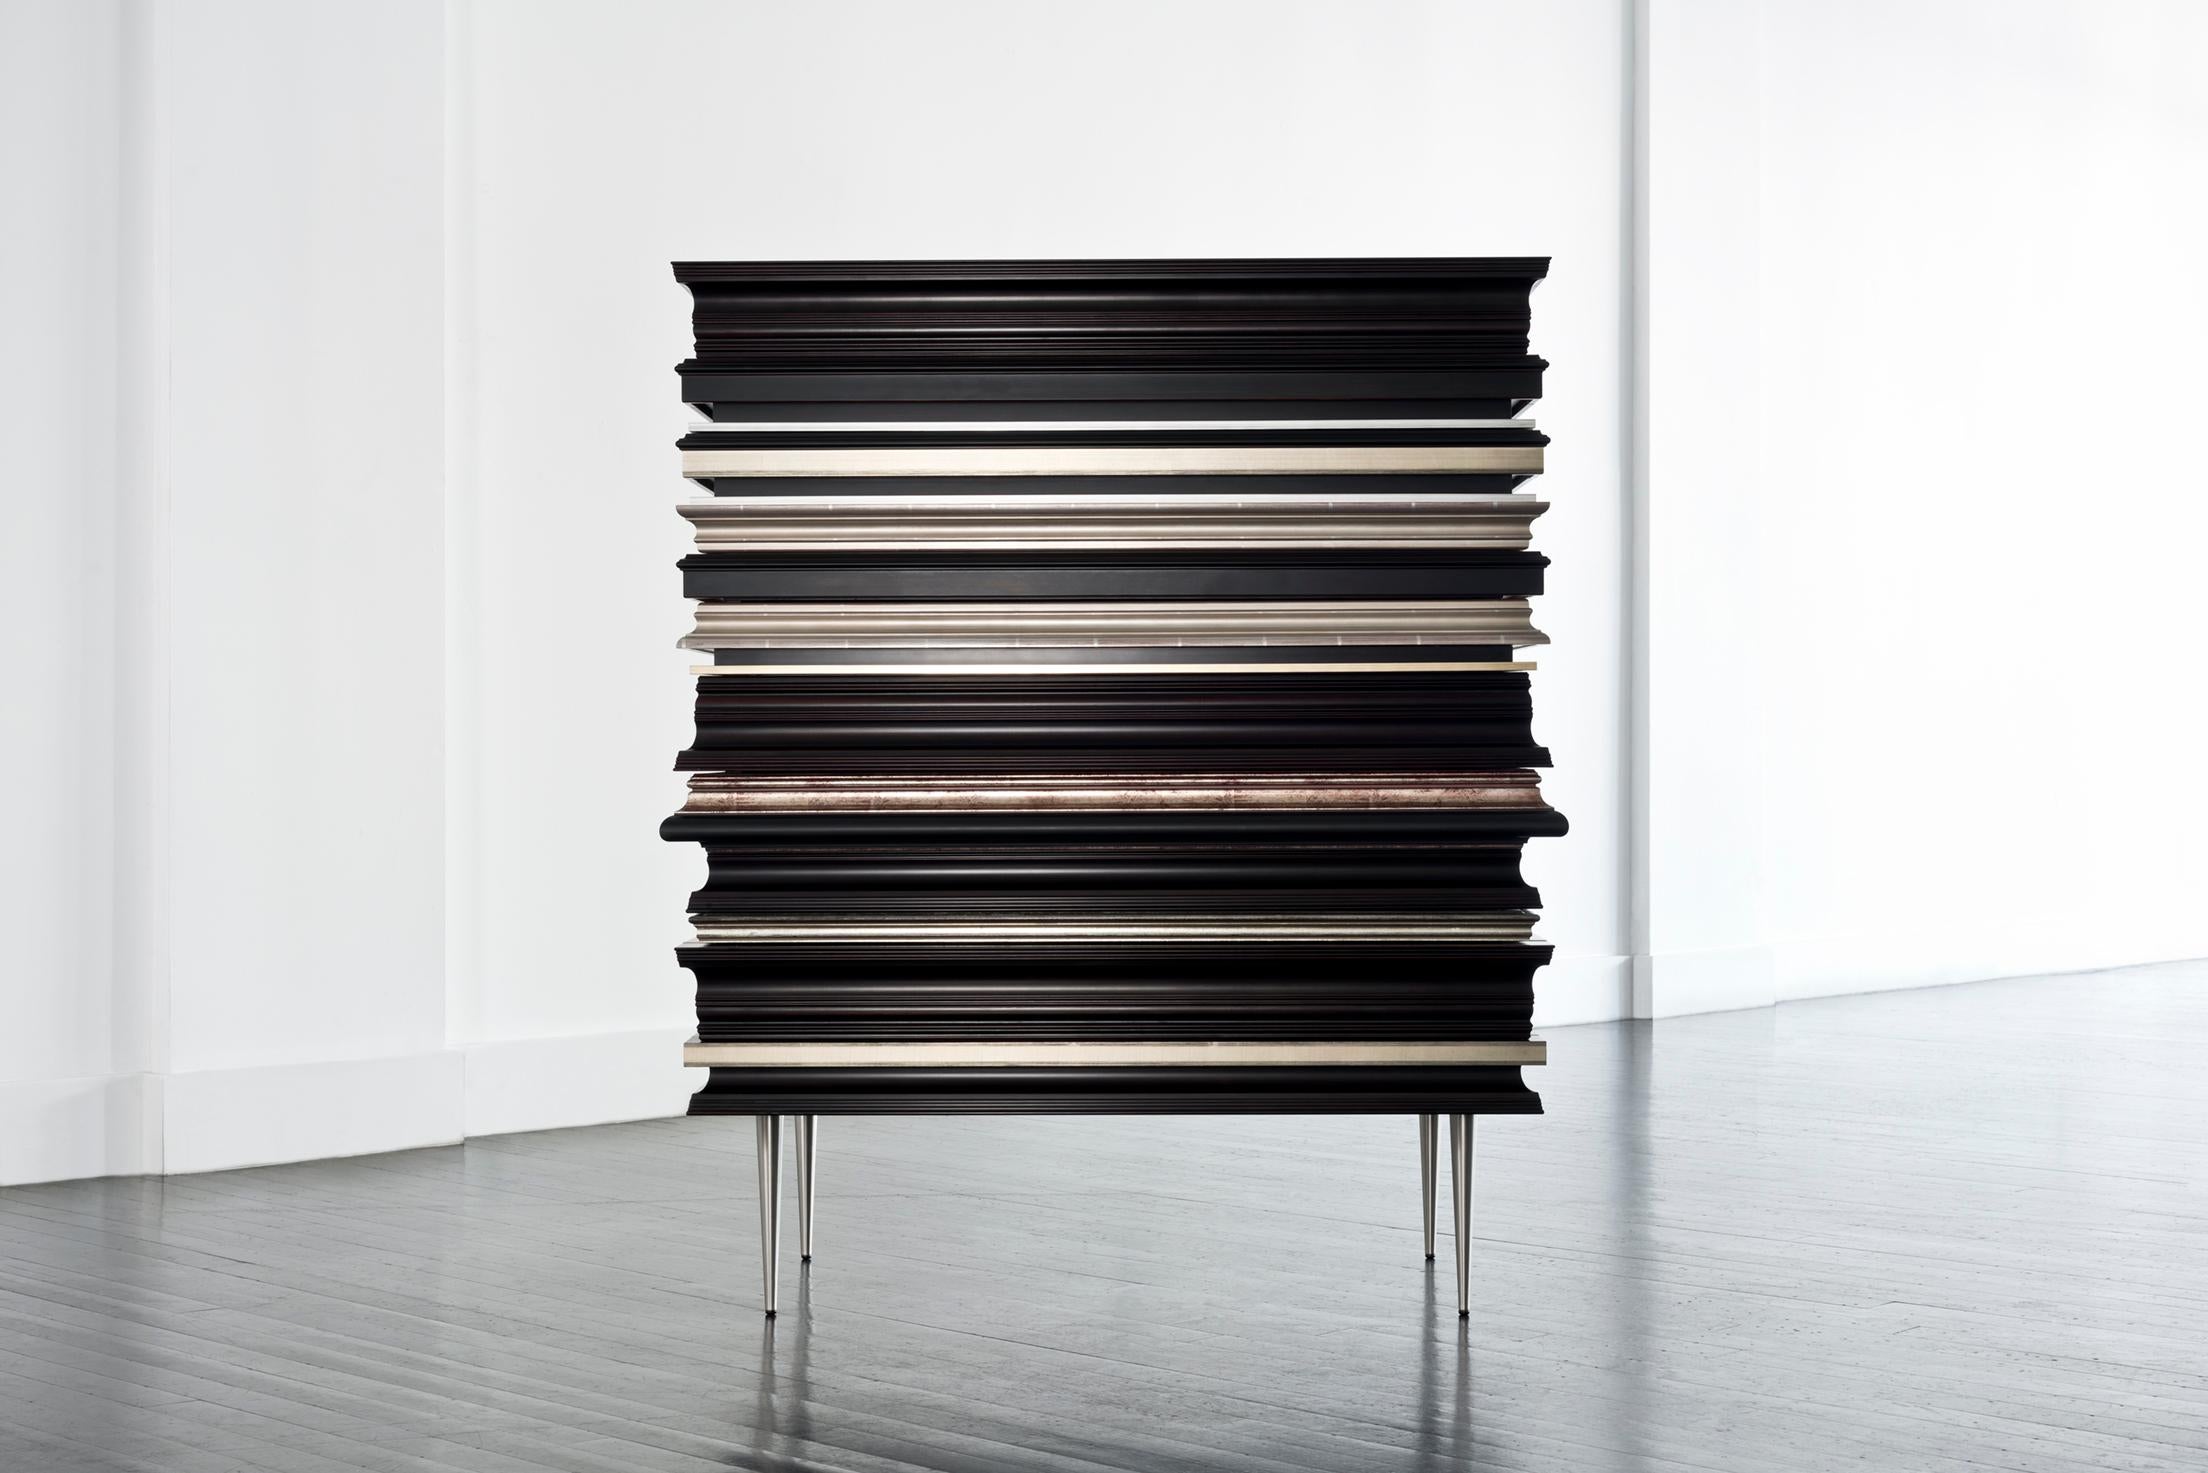 Frame dresser silver by Luis Pons
Dimensions: W 91.5 x D 53.5 x H 112 cm
Materials: Metal, wood, bronzed, hand-crafted

Also available in different colors

Fine crafted wood moldings are applied to the whole piece, concealing drawers and